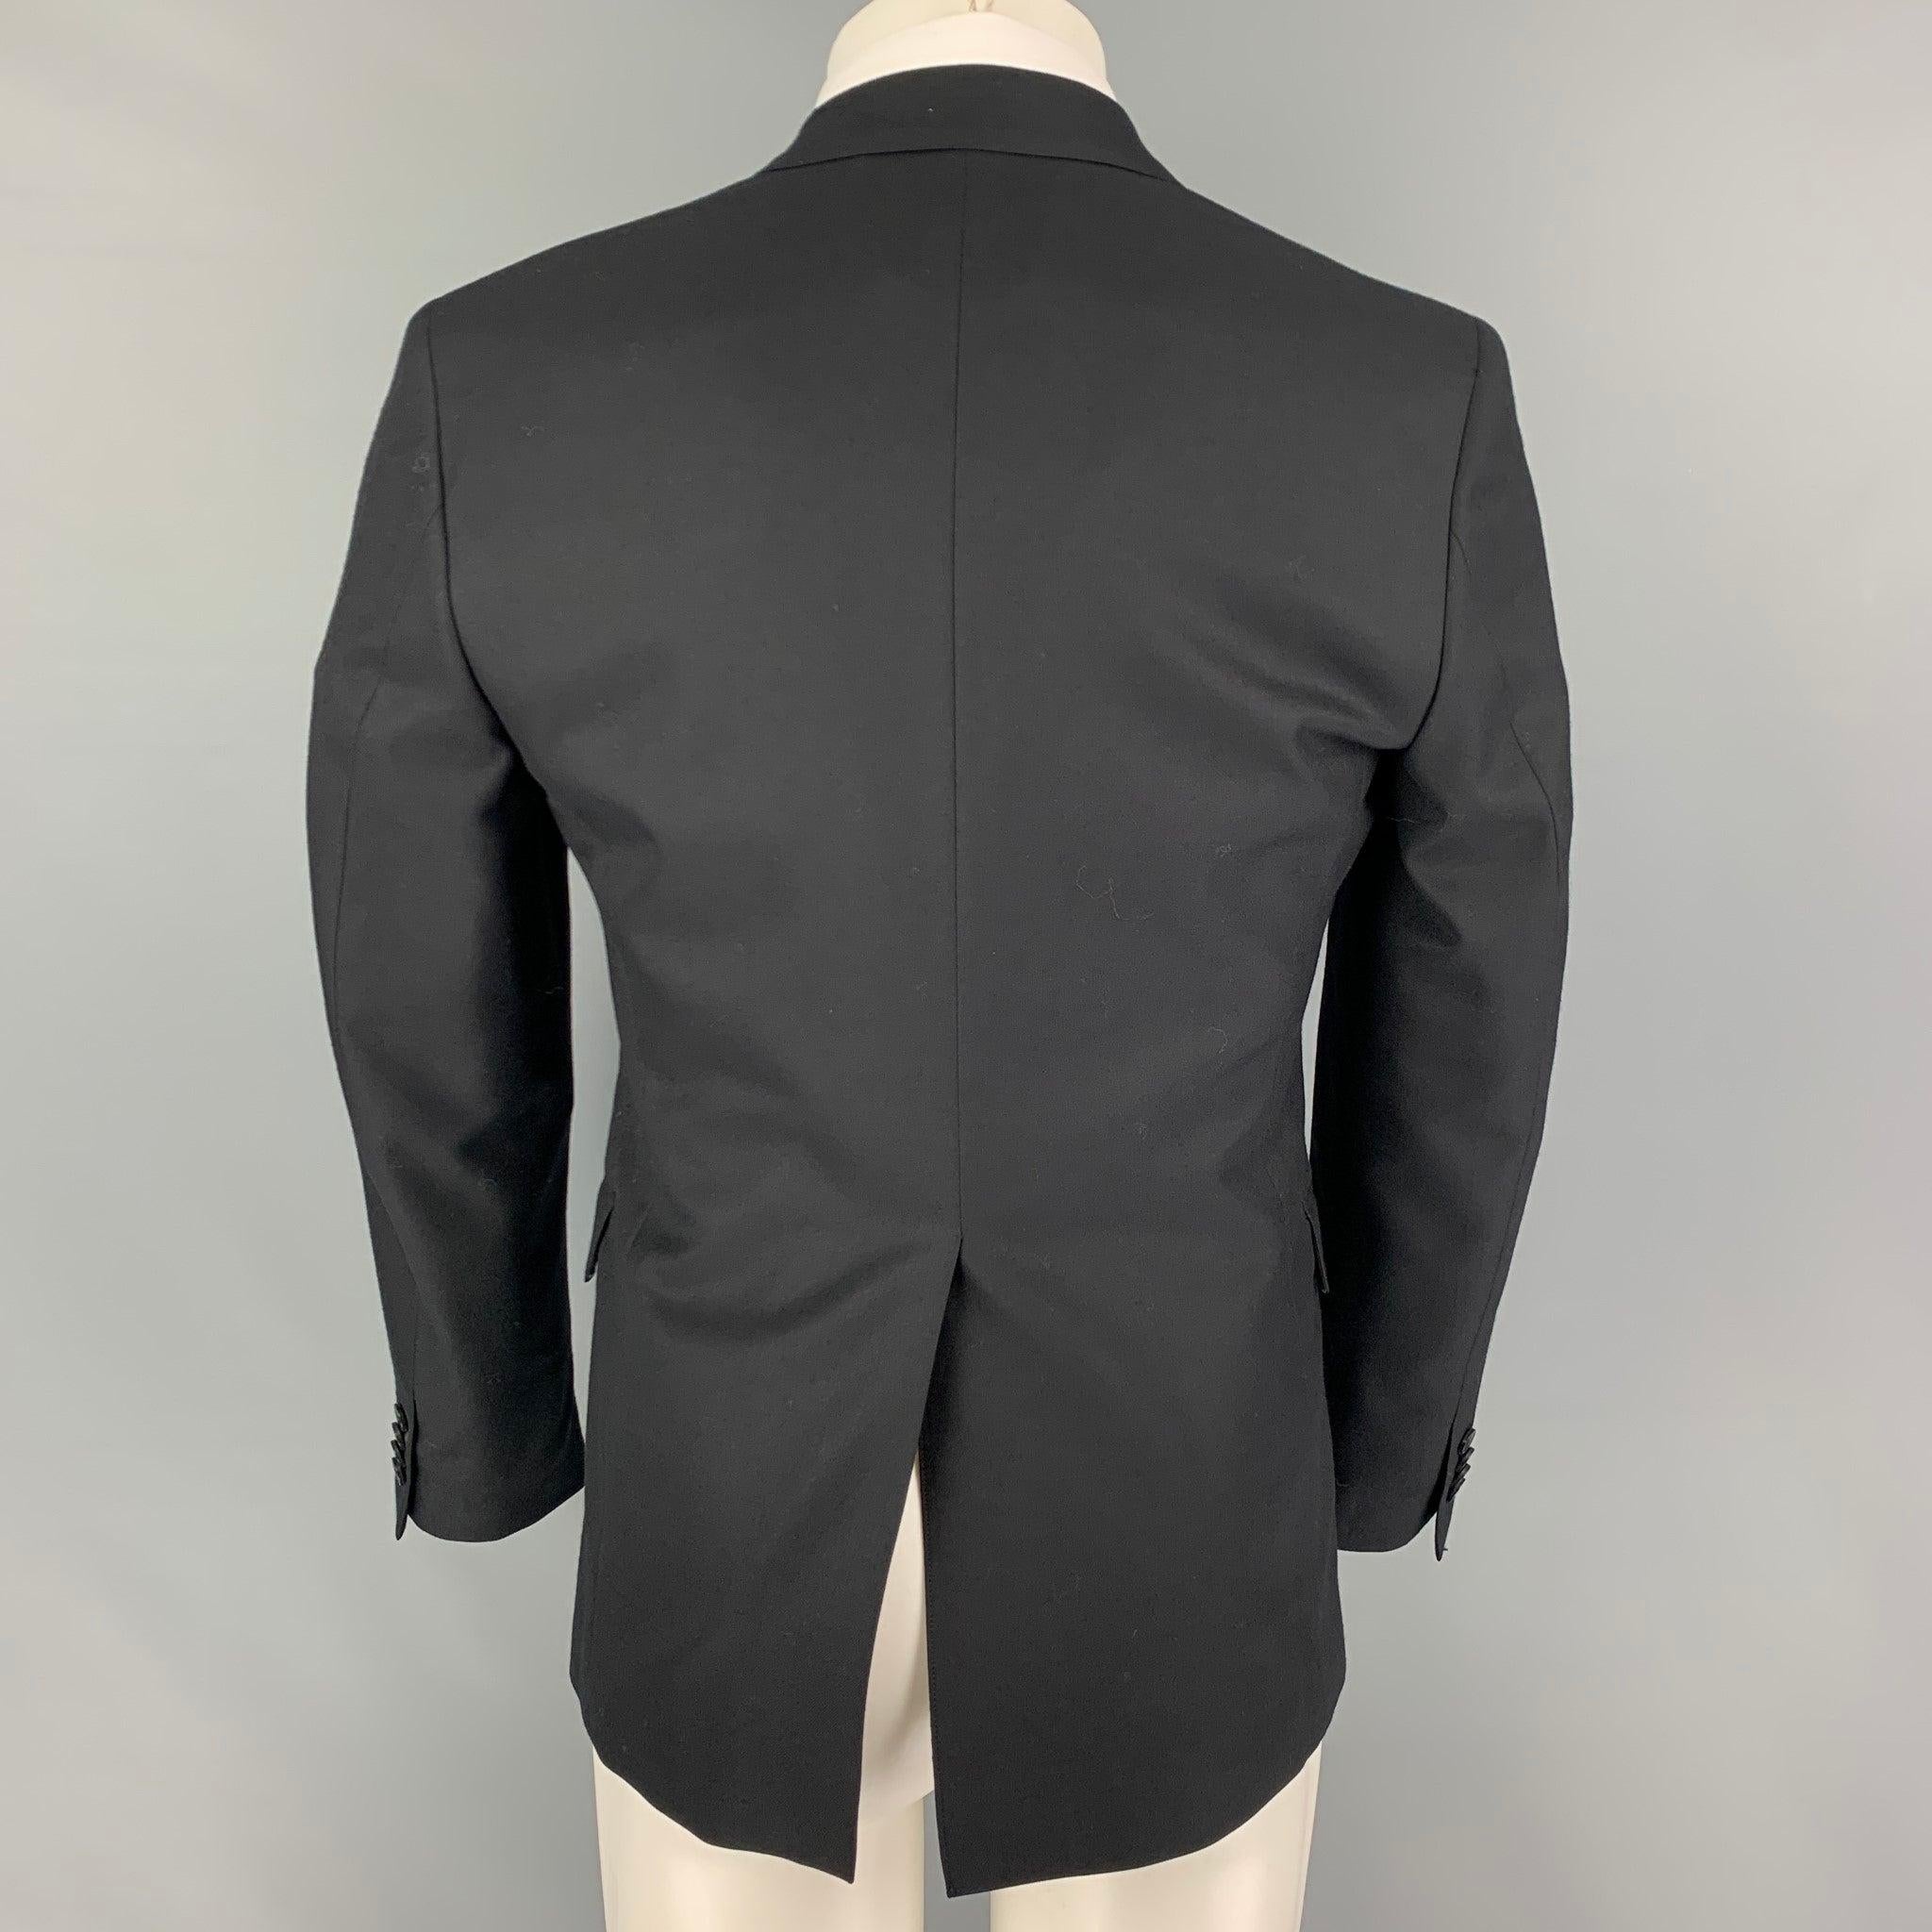 THEORY Size 38 Short Black Wool Notch Lapel Sport Coat In Good Condition For Sale In San Francisco, CA